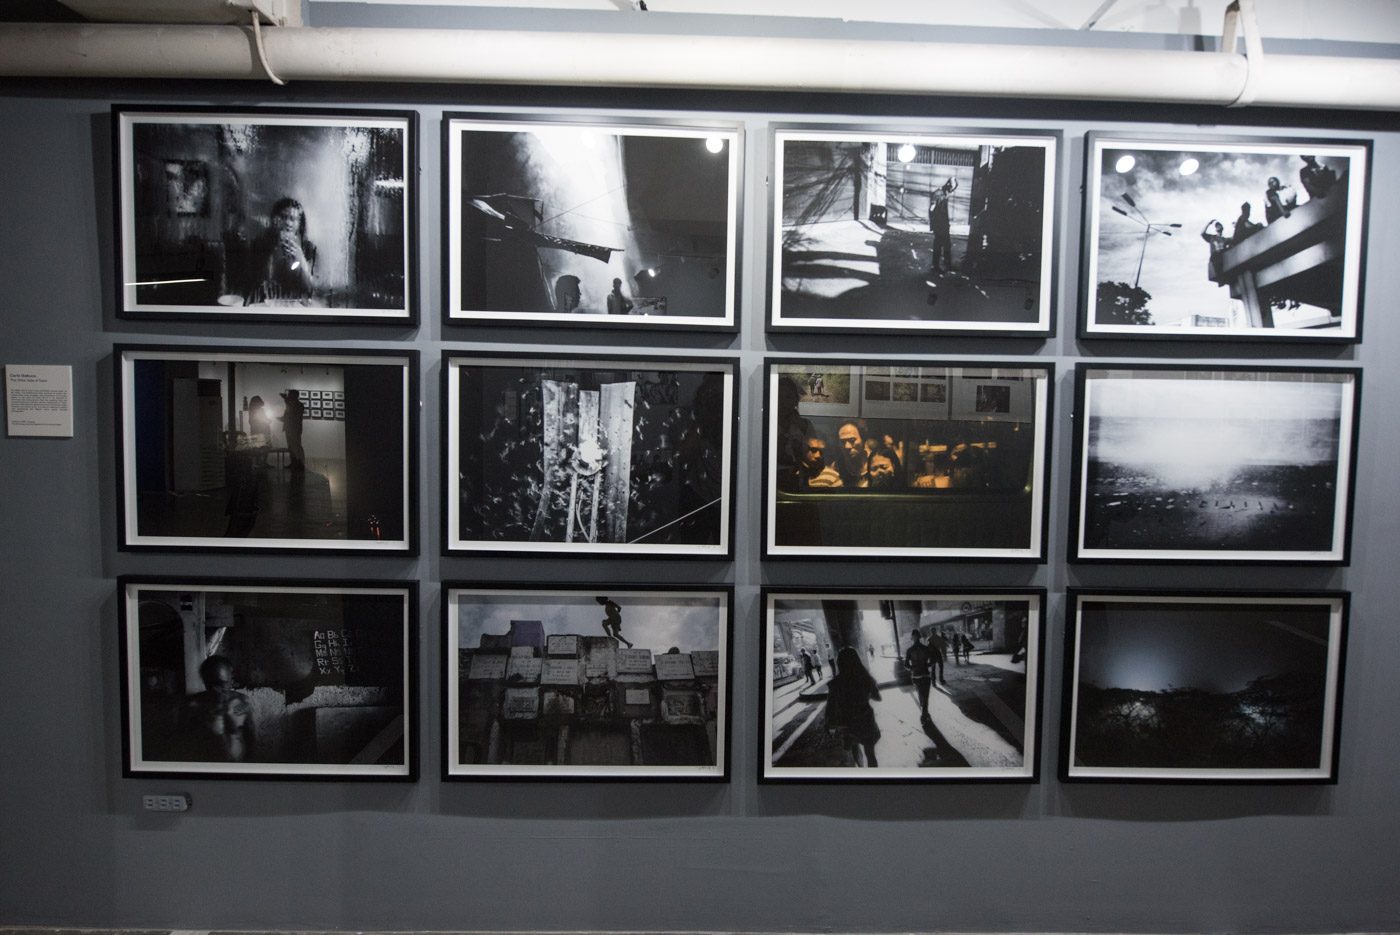 DOCUMENTARY PHOTOGRAPHY. An entire section of the Art Fair is dedicated to photojournalism. 